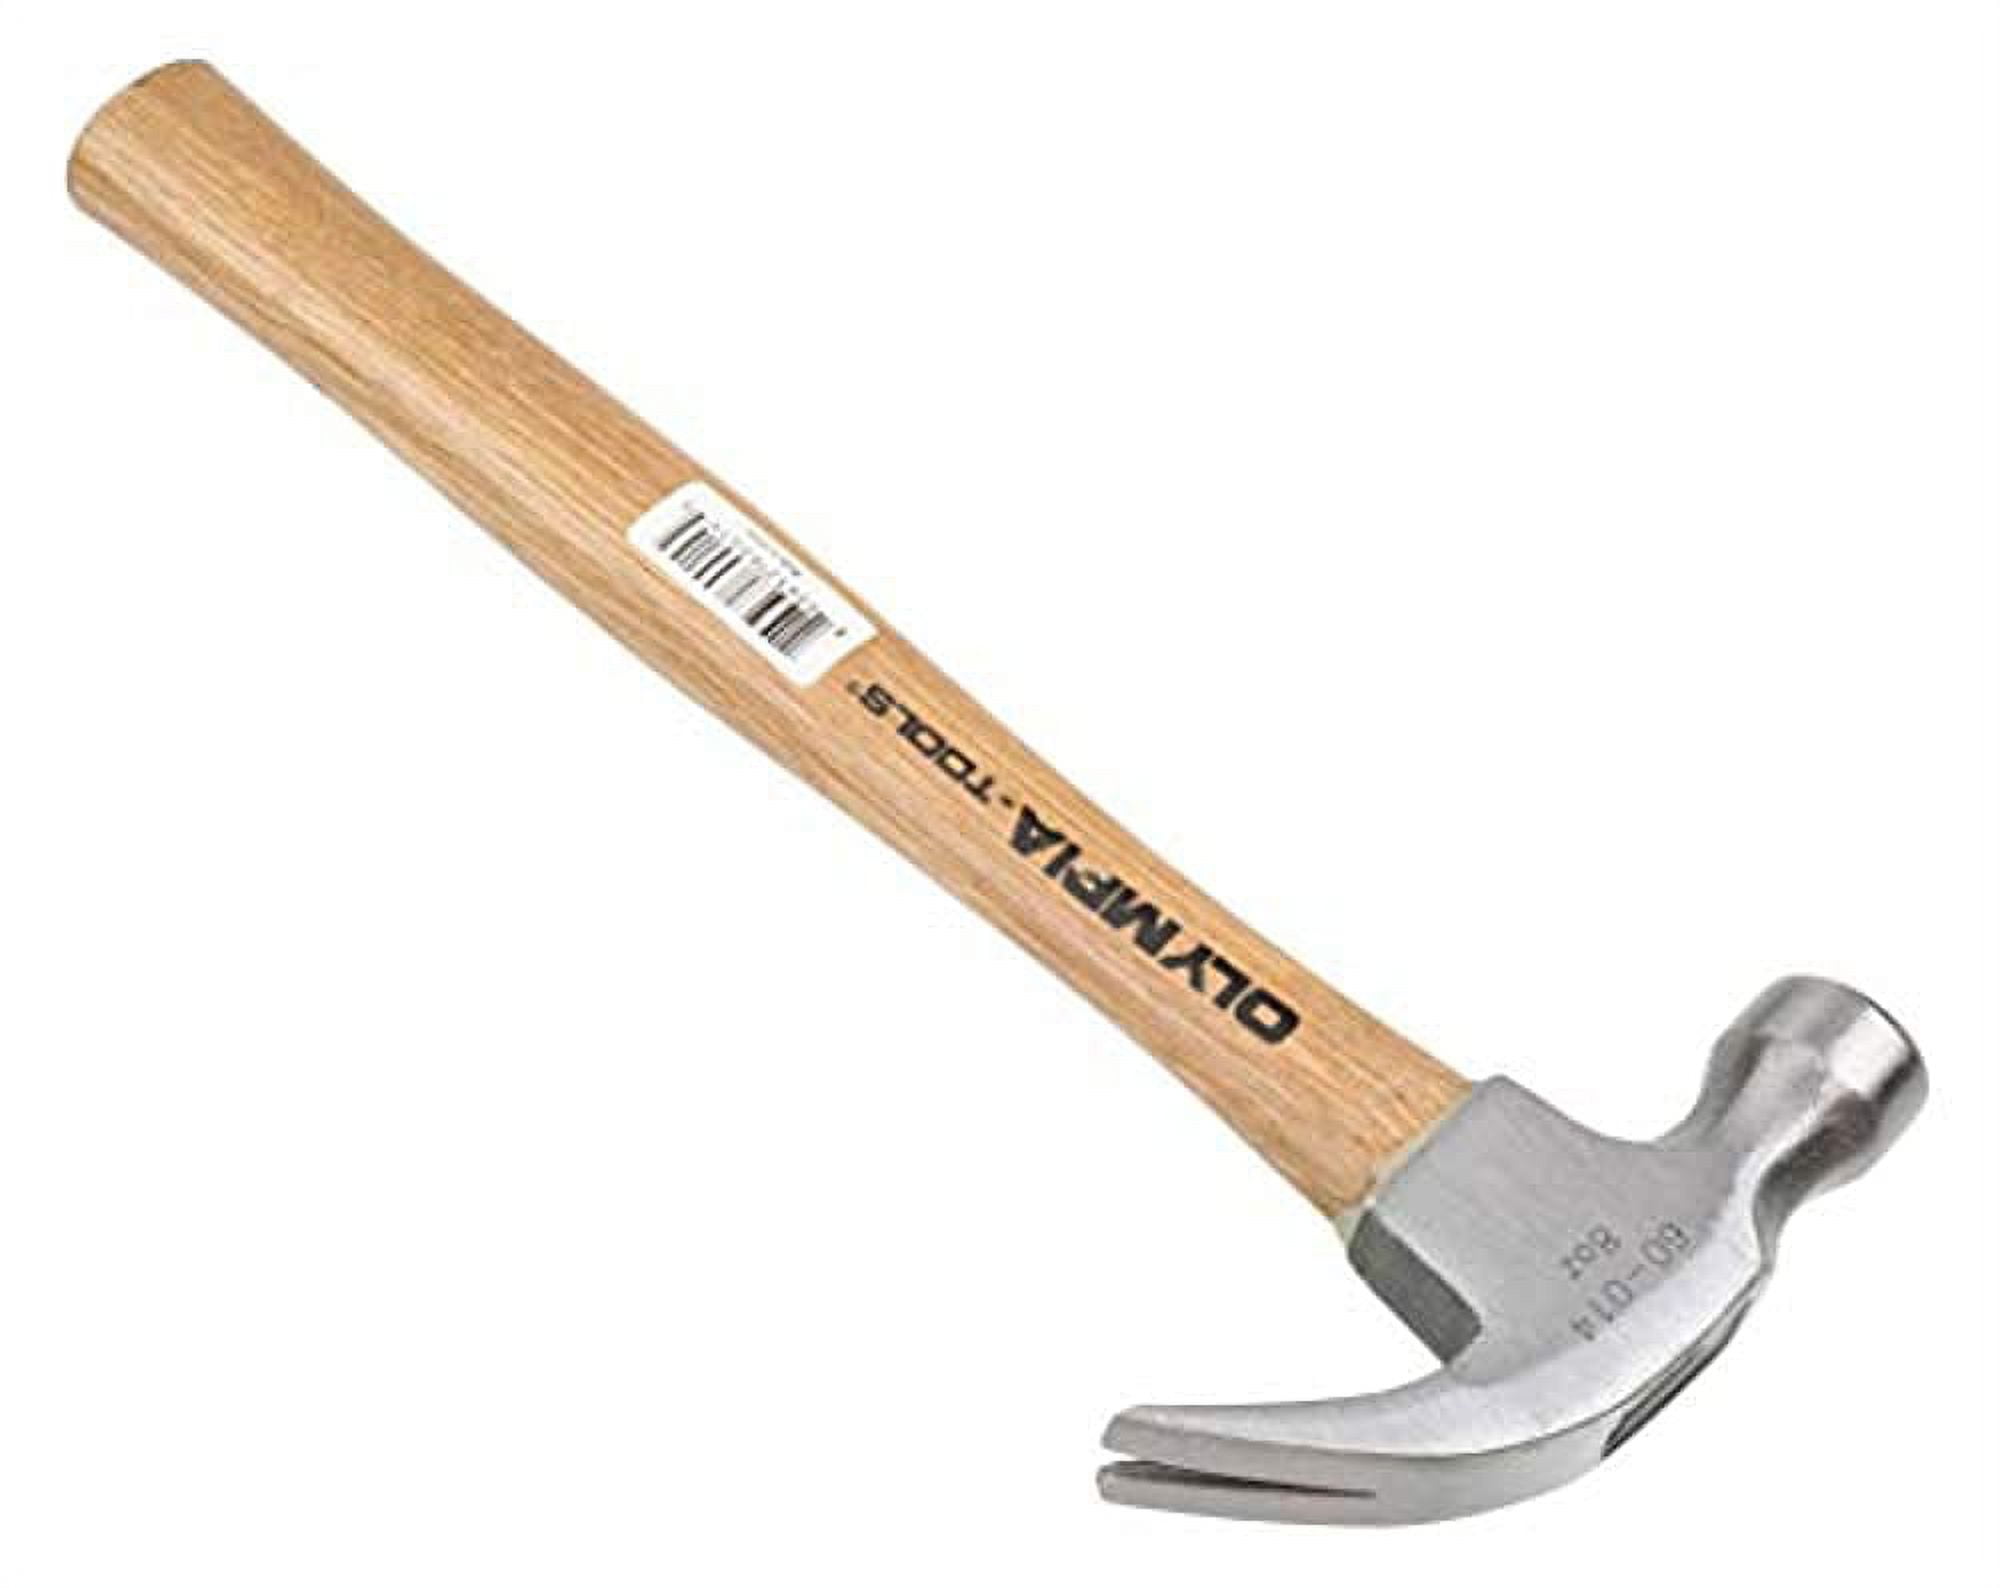 UToolmart 8.8 Ounce Claw Hammer - Forged Carbon Steel Head - Etched Solid  Oak Handle for more durability